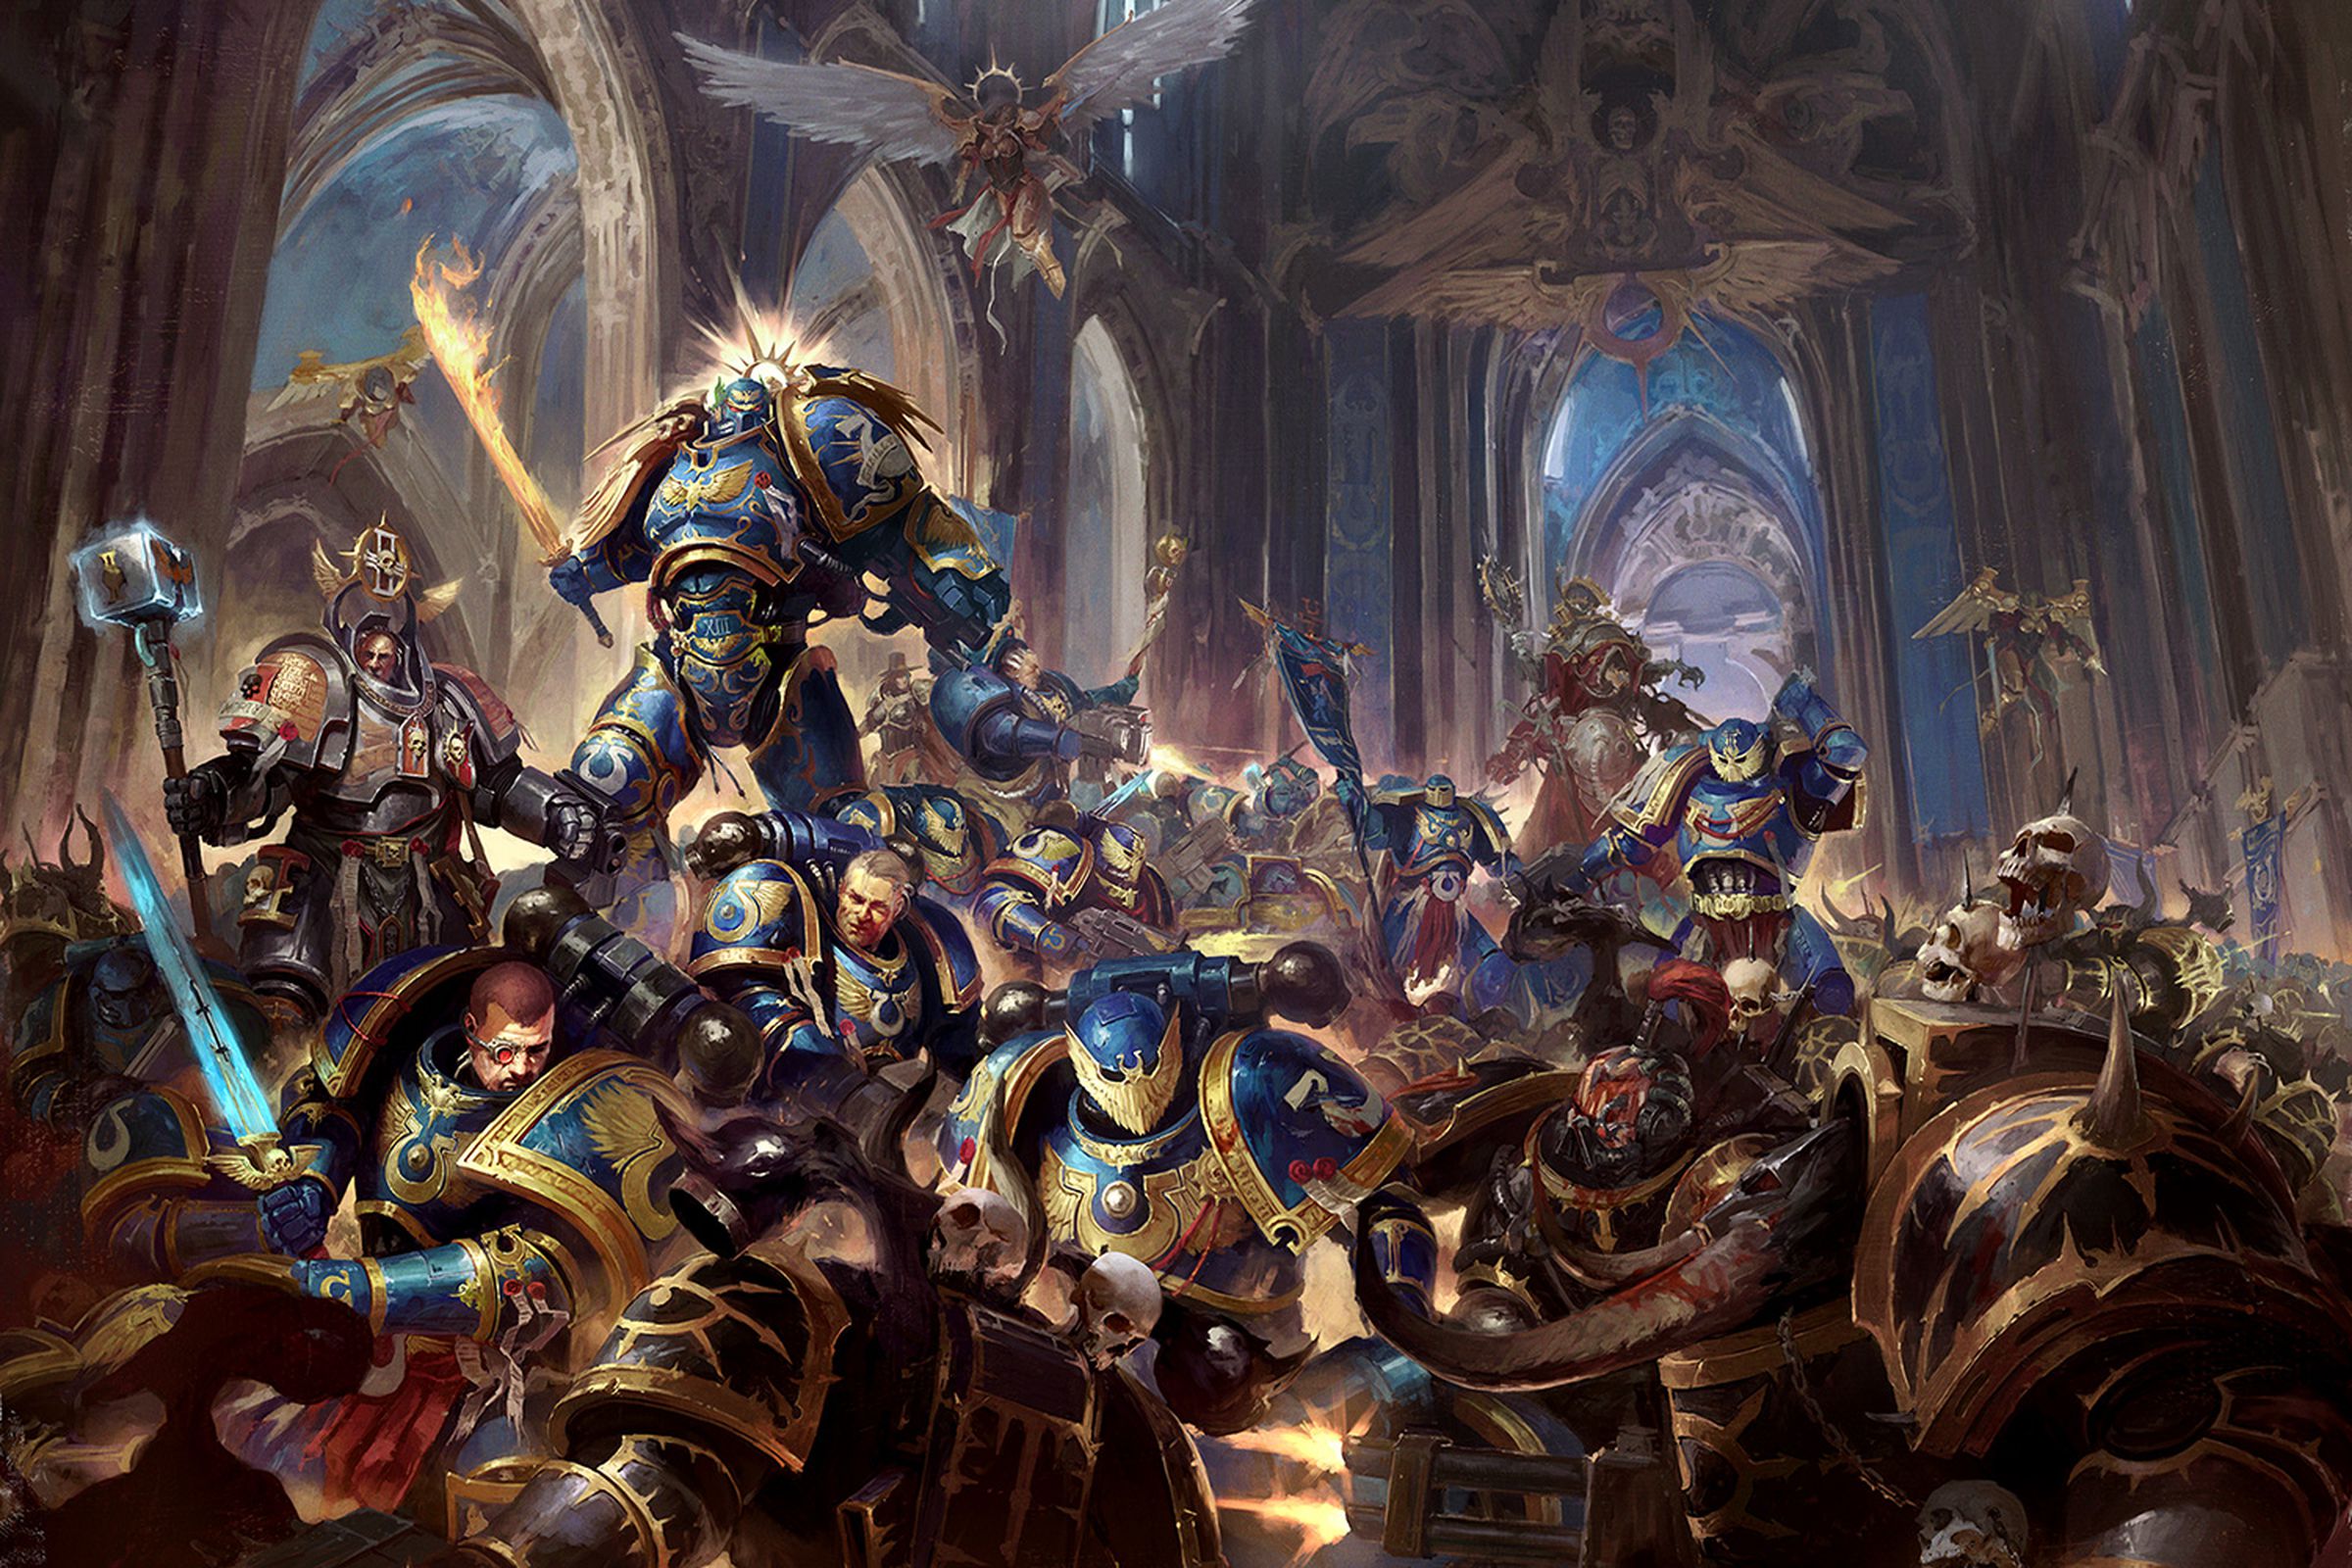 Roboute Guilliman, primarch of the Ultramarines, takes on the Black Legion.